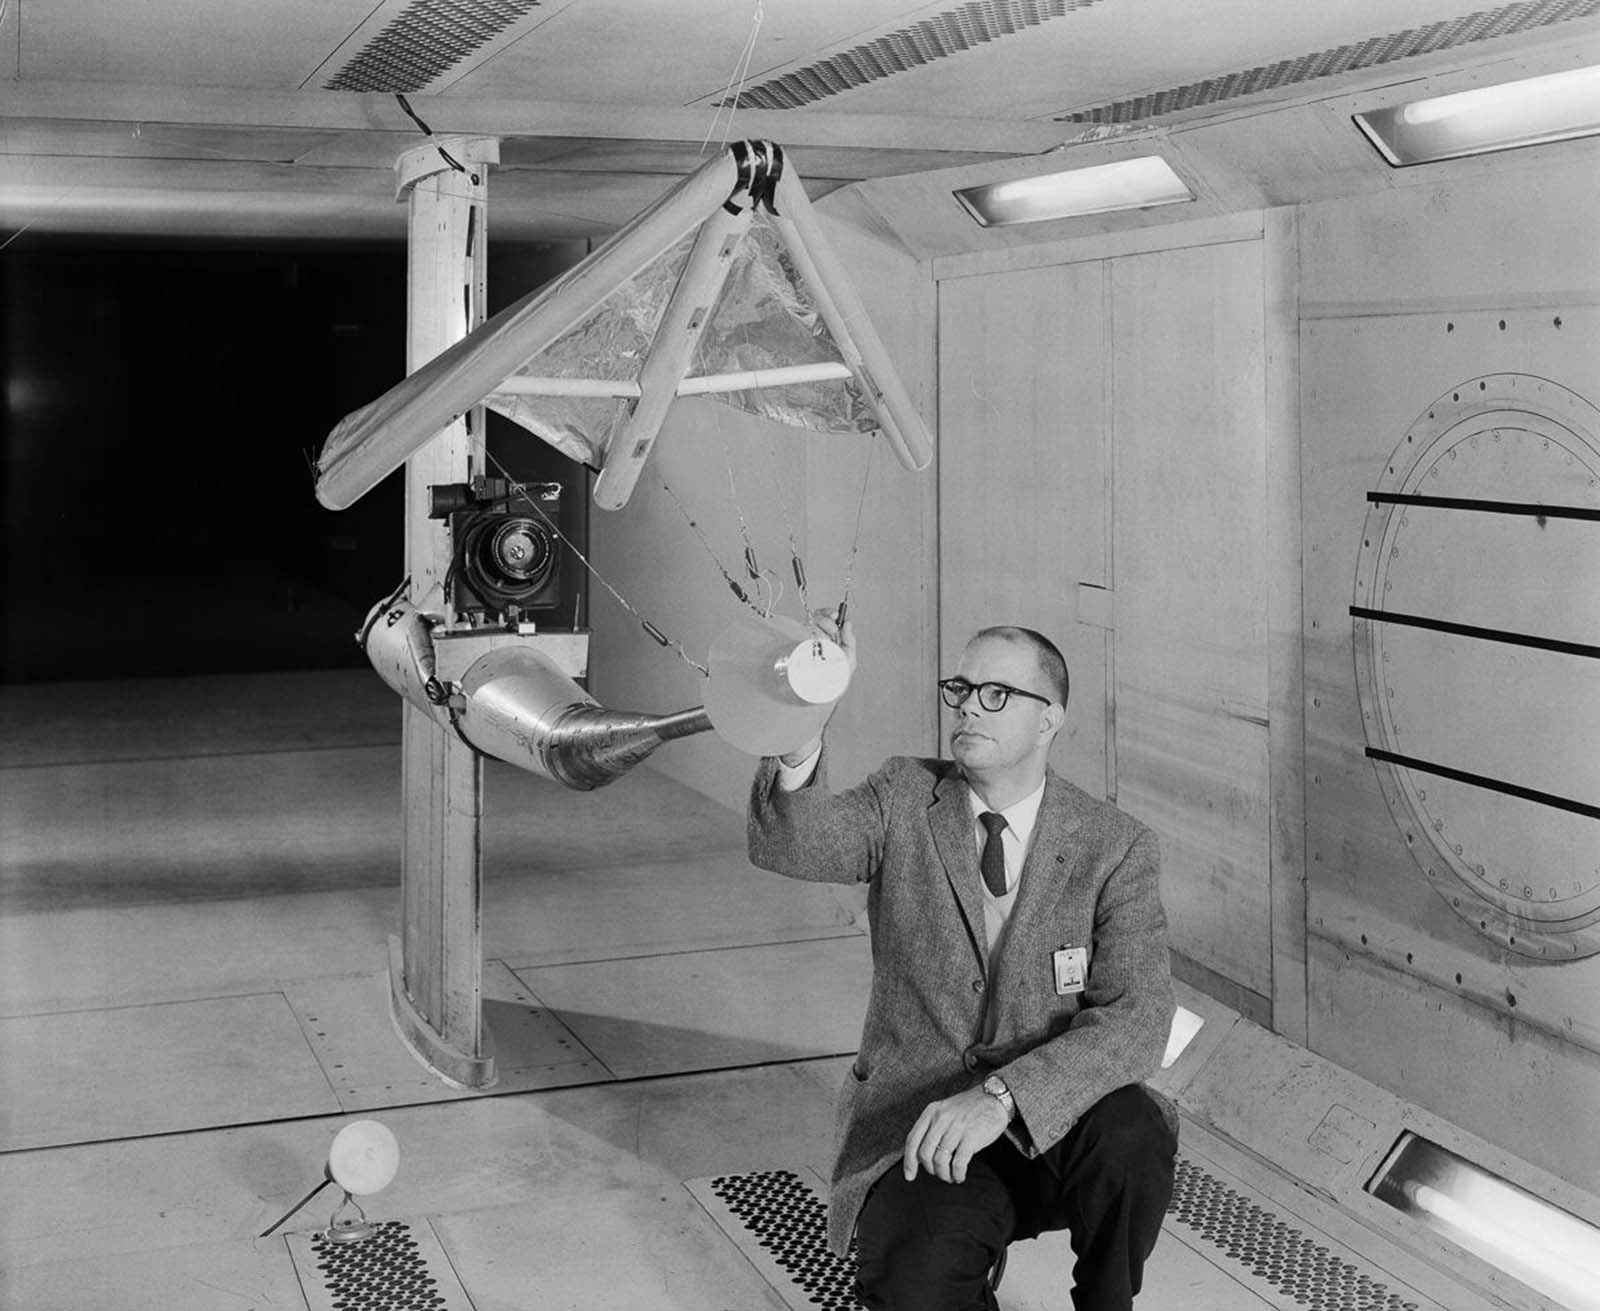 W. C. Sleeman, Jr. inspects a model of a paraglider in the 300 mph, 7 x 10-foot Wind Tunnel.